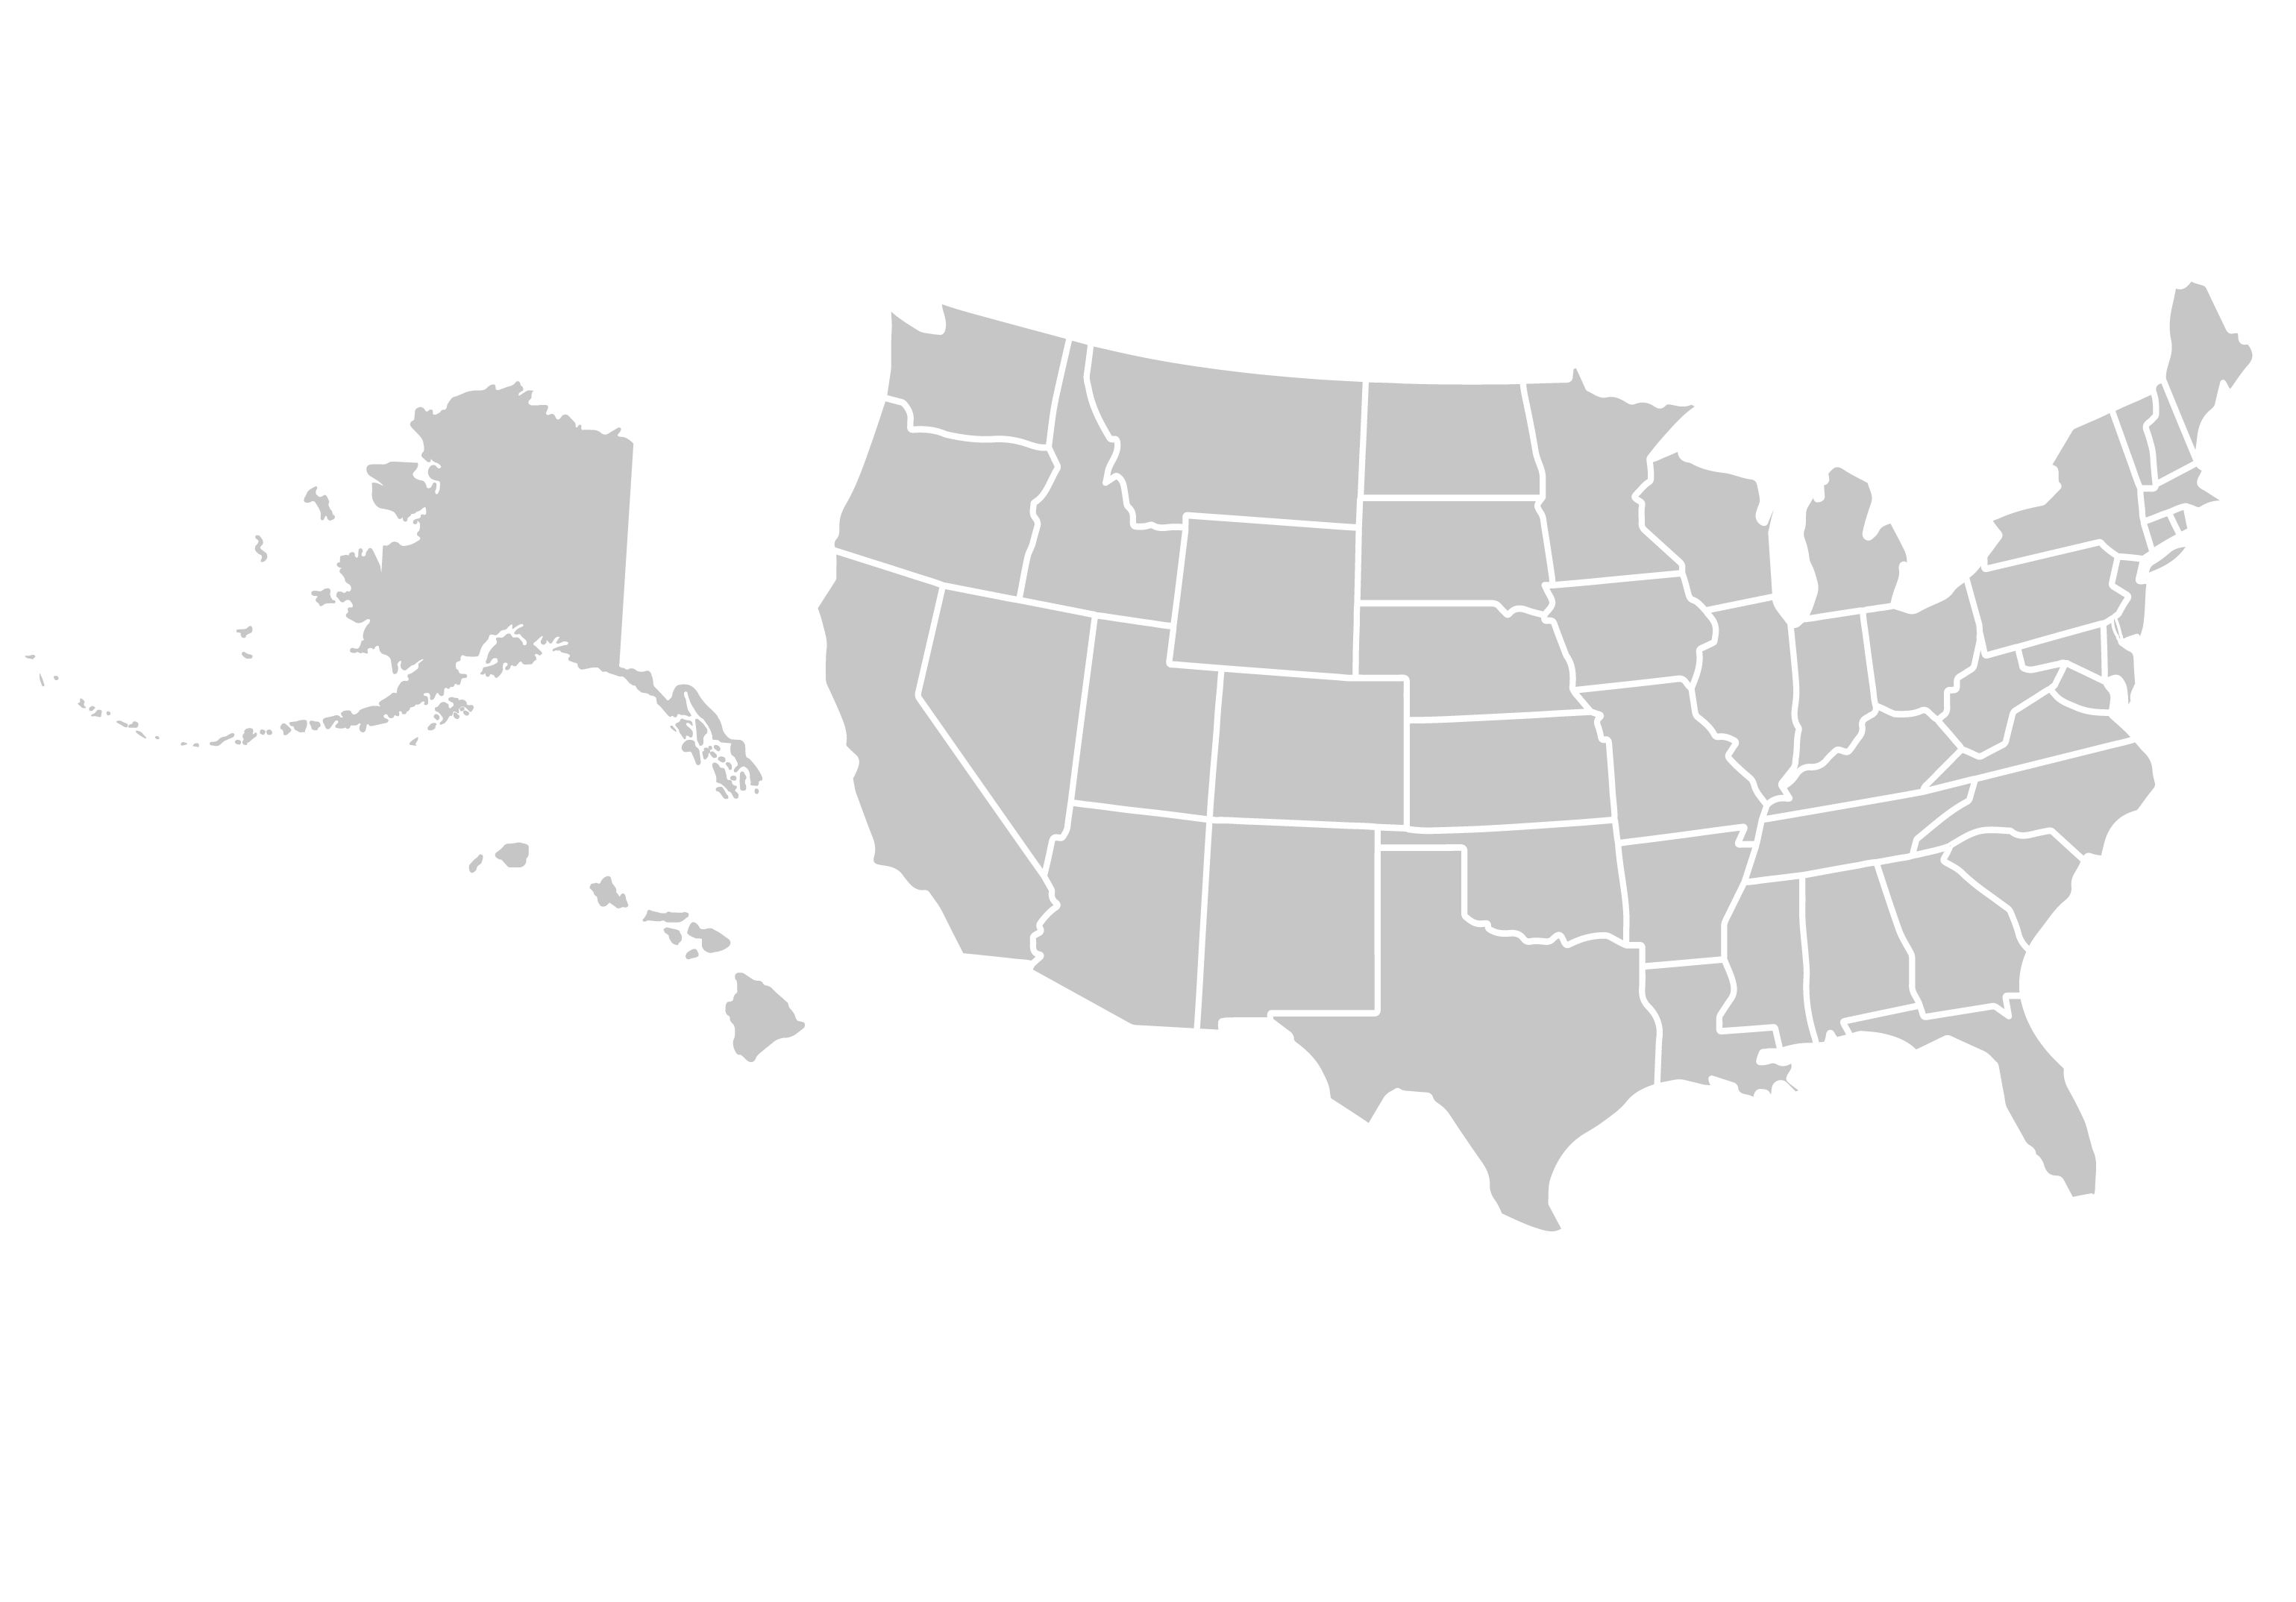 Silhouette of the United States